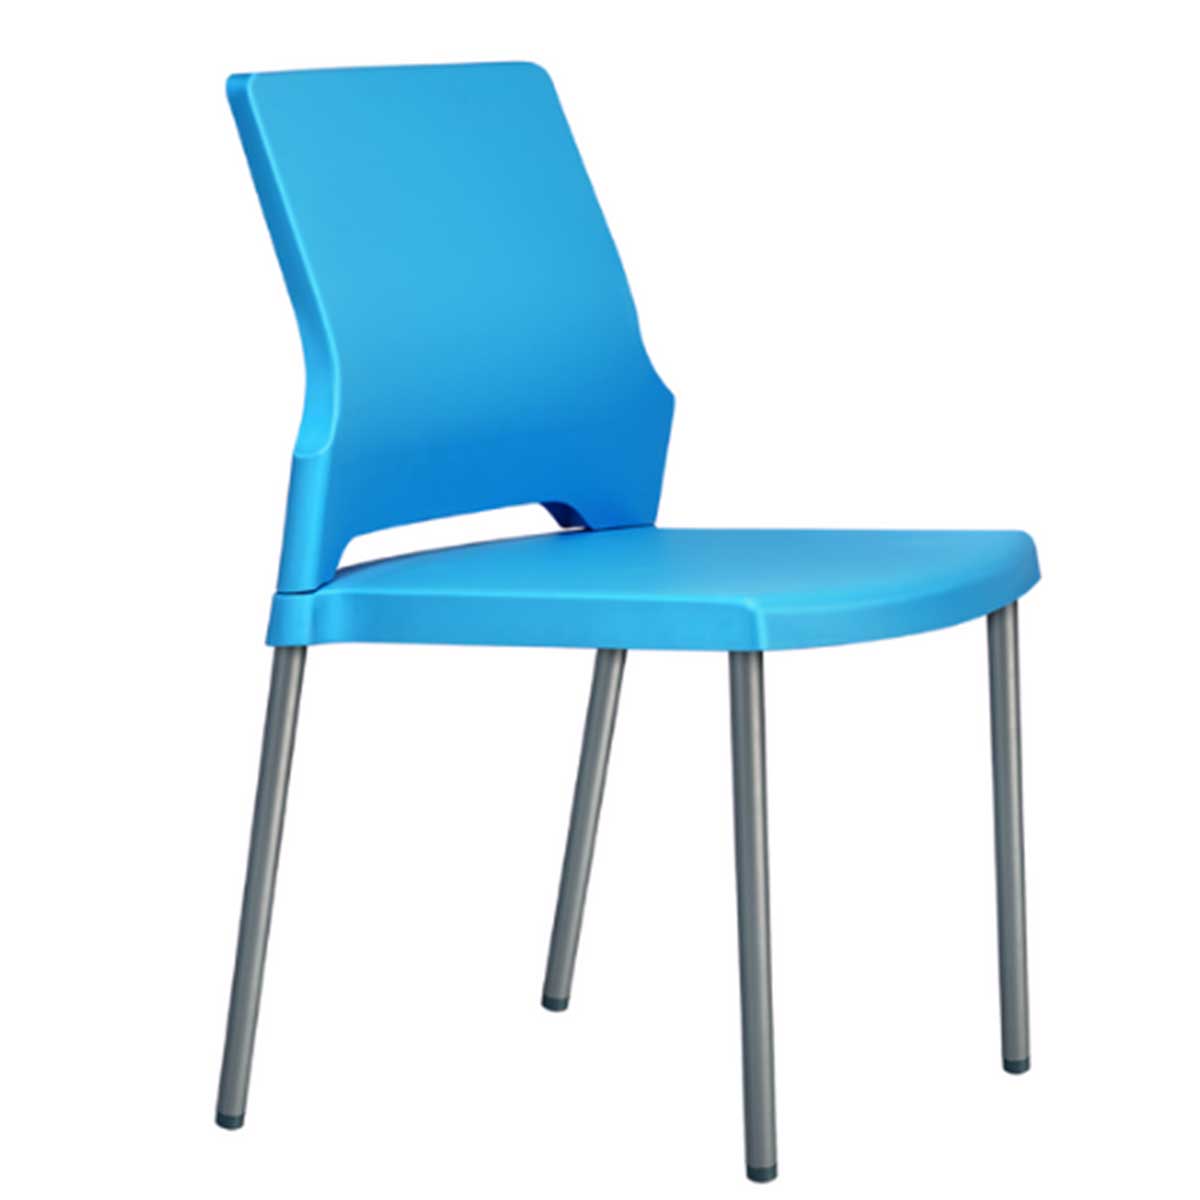 Cafeteria Chair Manufacturers, Suppliers in Vasant Vihar